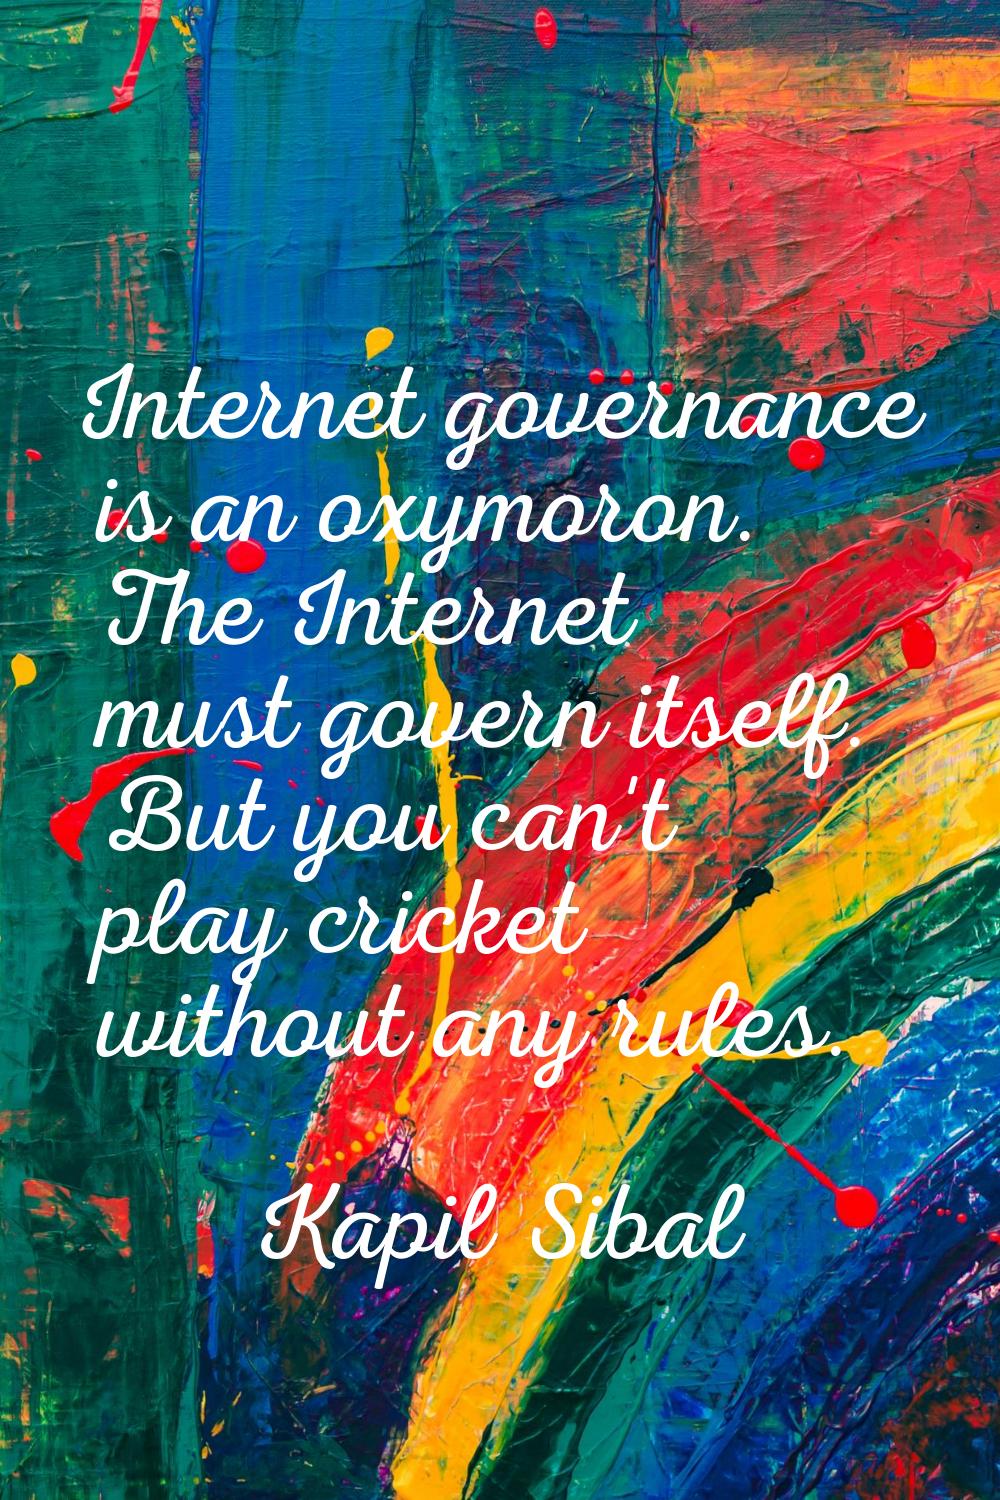 Internet governance is an oxymoron. The Internet must govern itself. But you can't play cricket wit